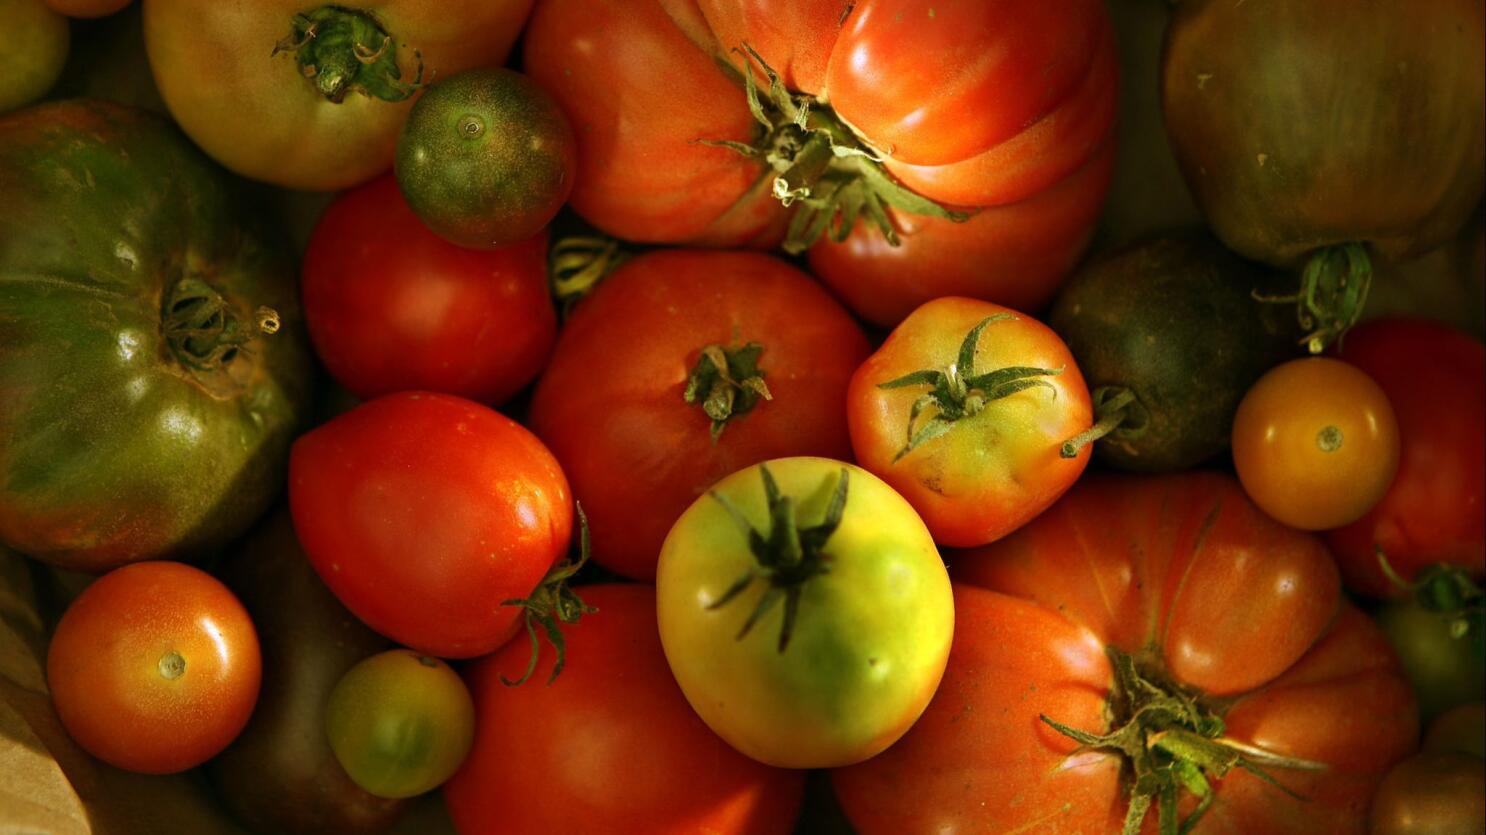 Beefsteak Tomatoes 101: Nutrition, Benefits, How To Use, Buy